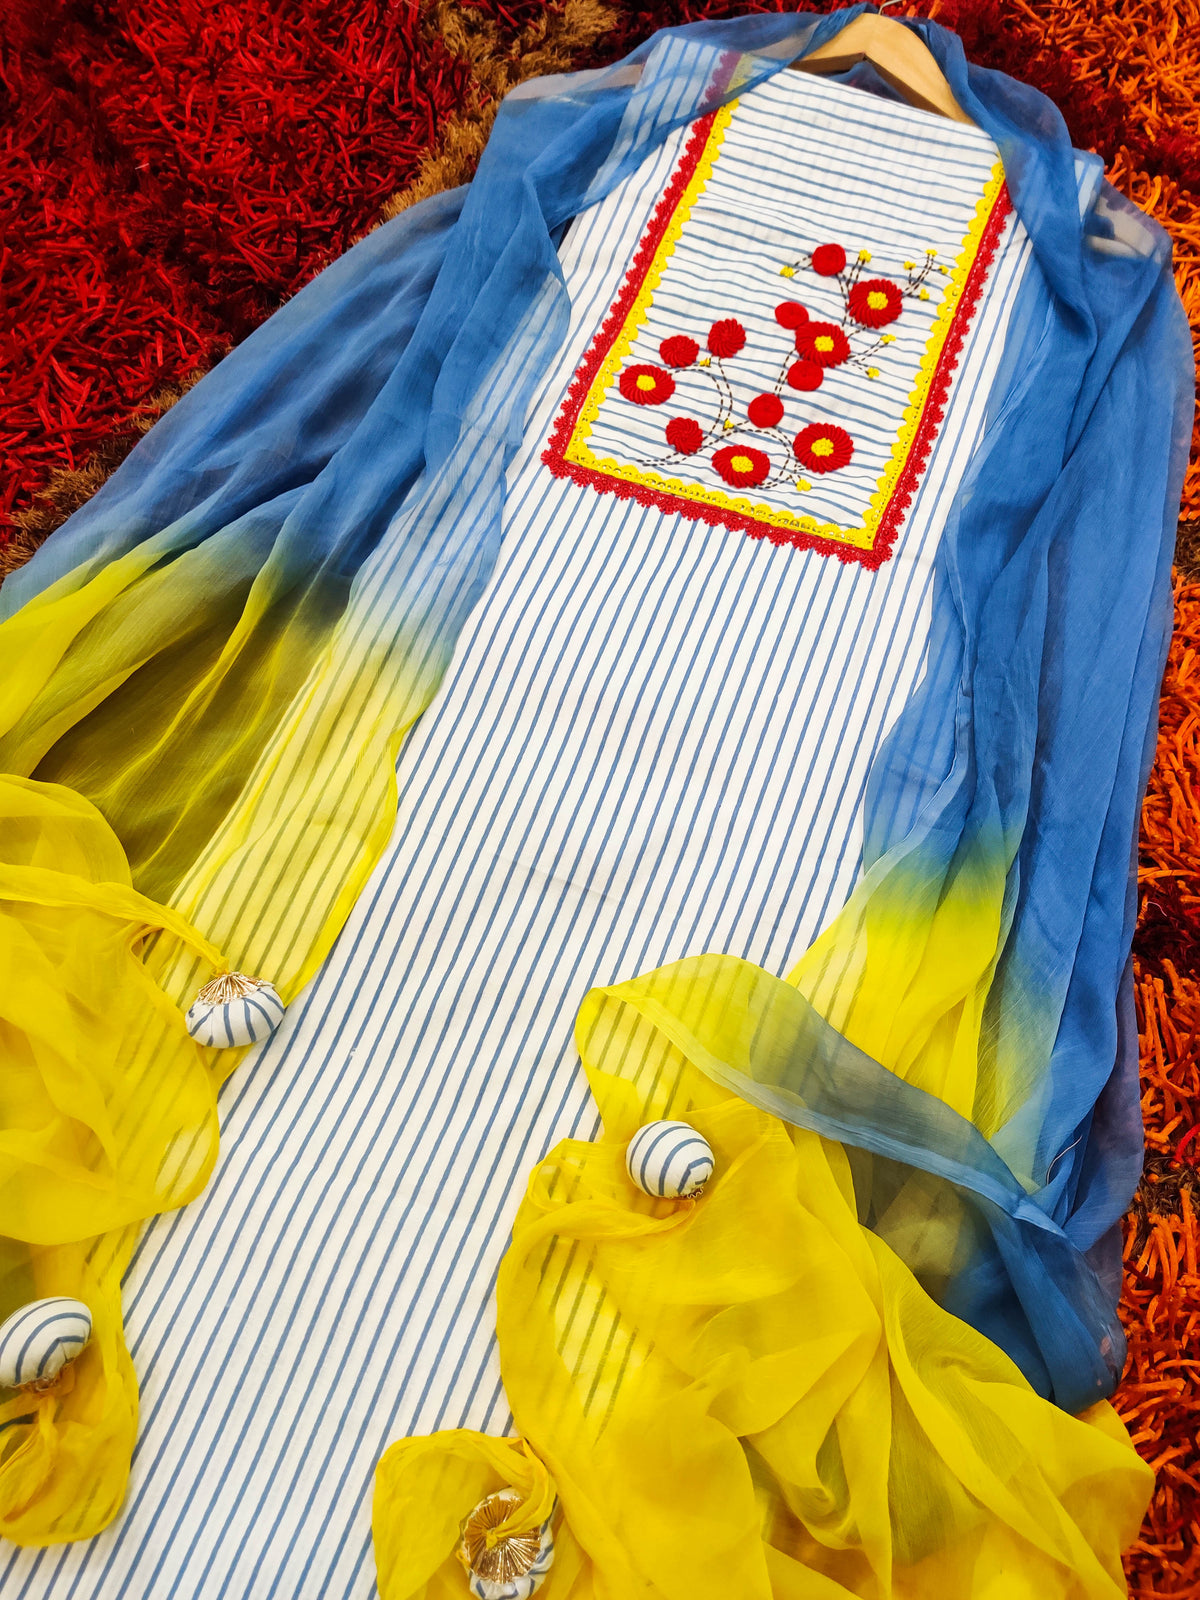 White Cotton Unstitched Dress Material Kurta Set with Vibrant Red and Yellow Lace Accents